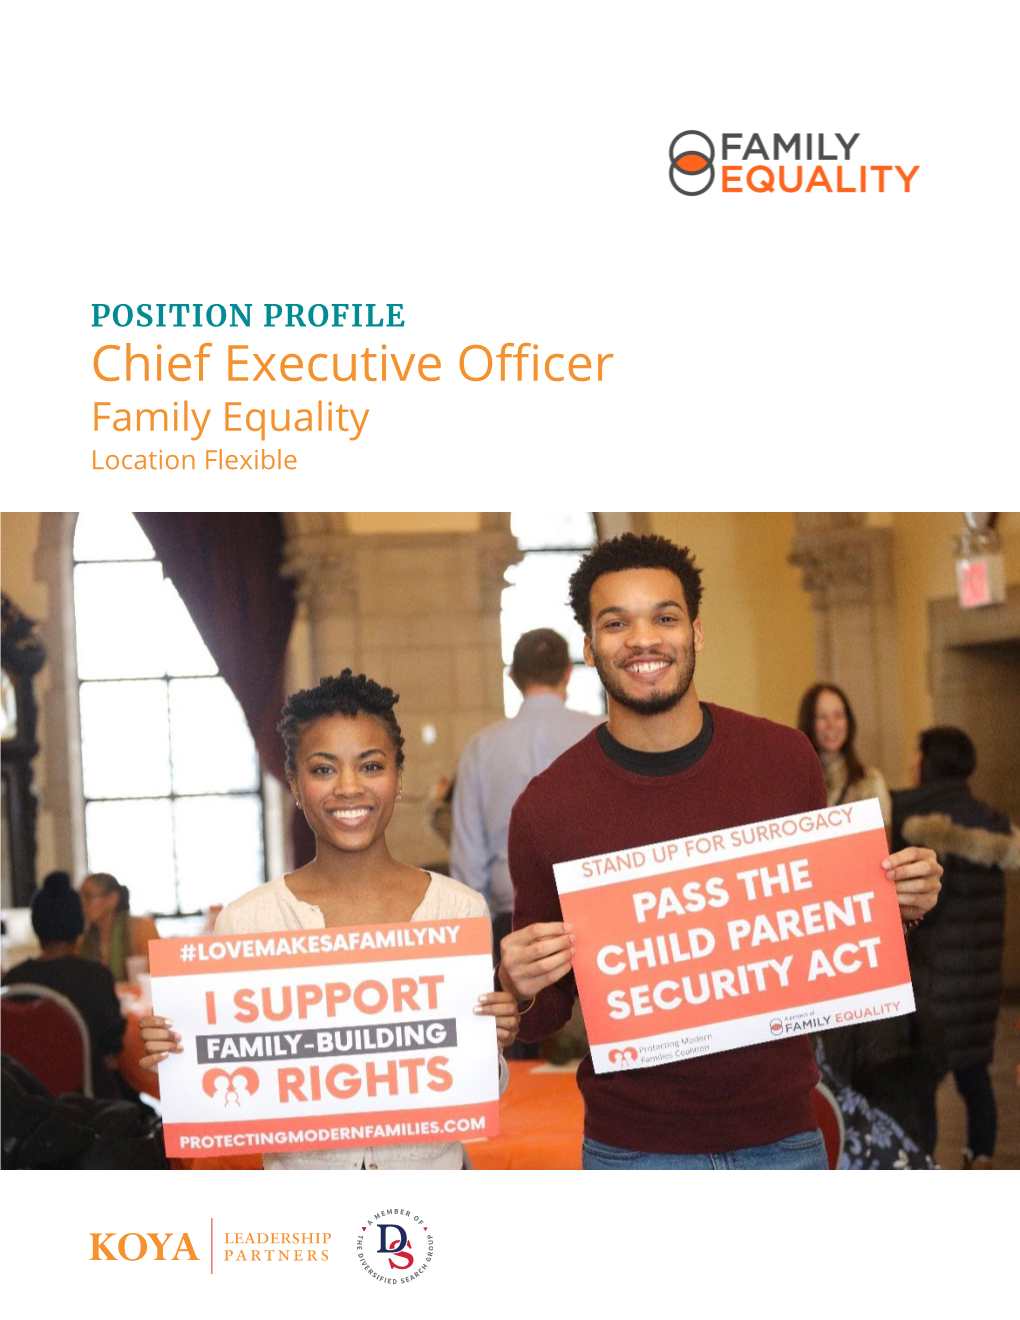 Chief Executive Officer Family Equality Location Flexible ABOUT FAMILY EQUALITY